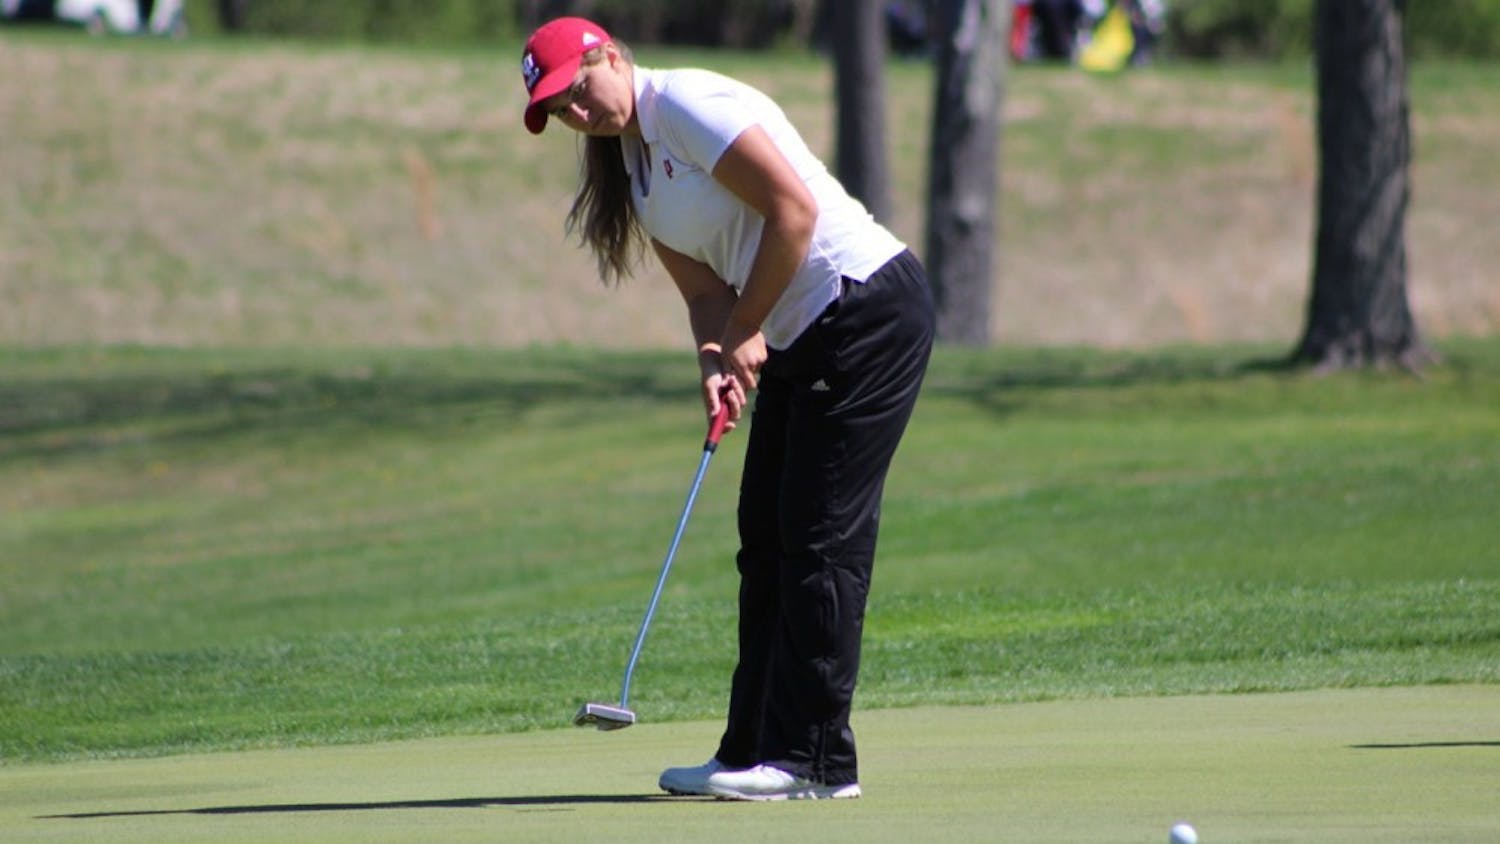 Sophomore Erin Harper putts during the first round of the IU Invitational at IU Golf Course. Harper finished tied for 25th at the Big Ten Championships in Cincinnati, Ohio.&nbsp;